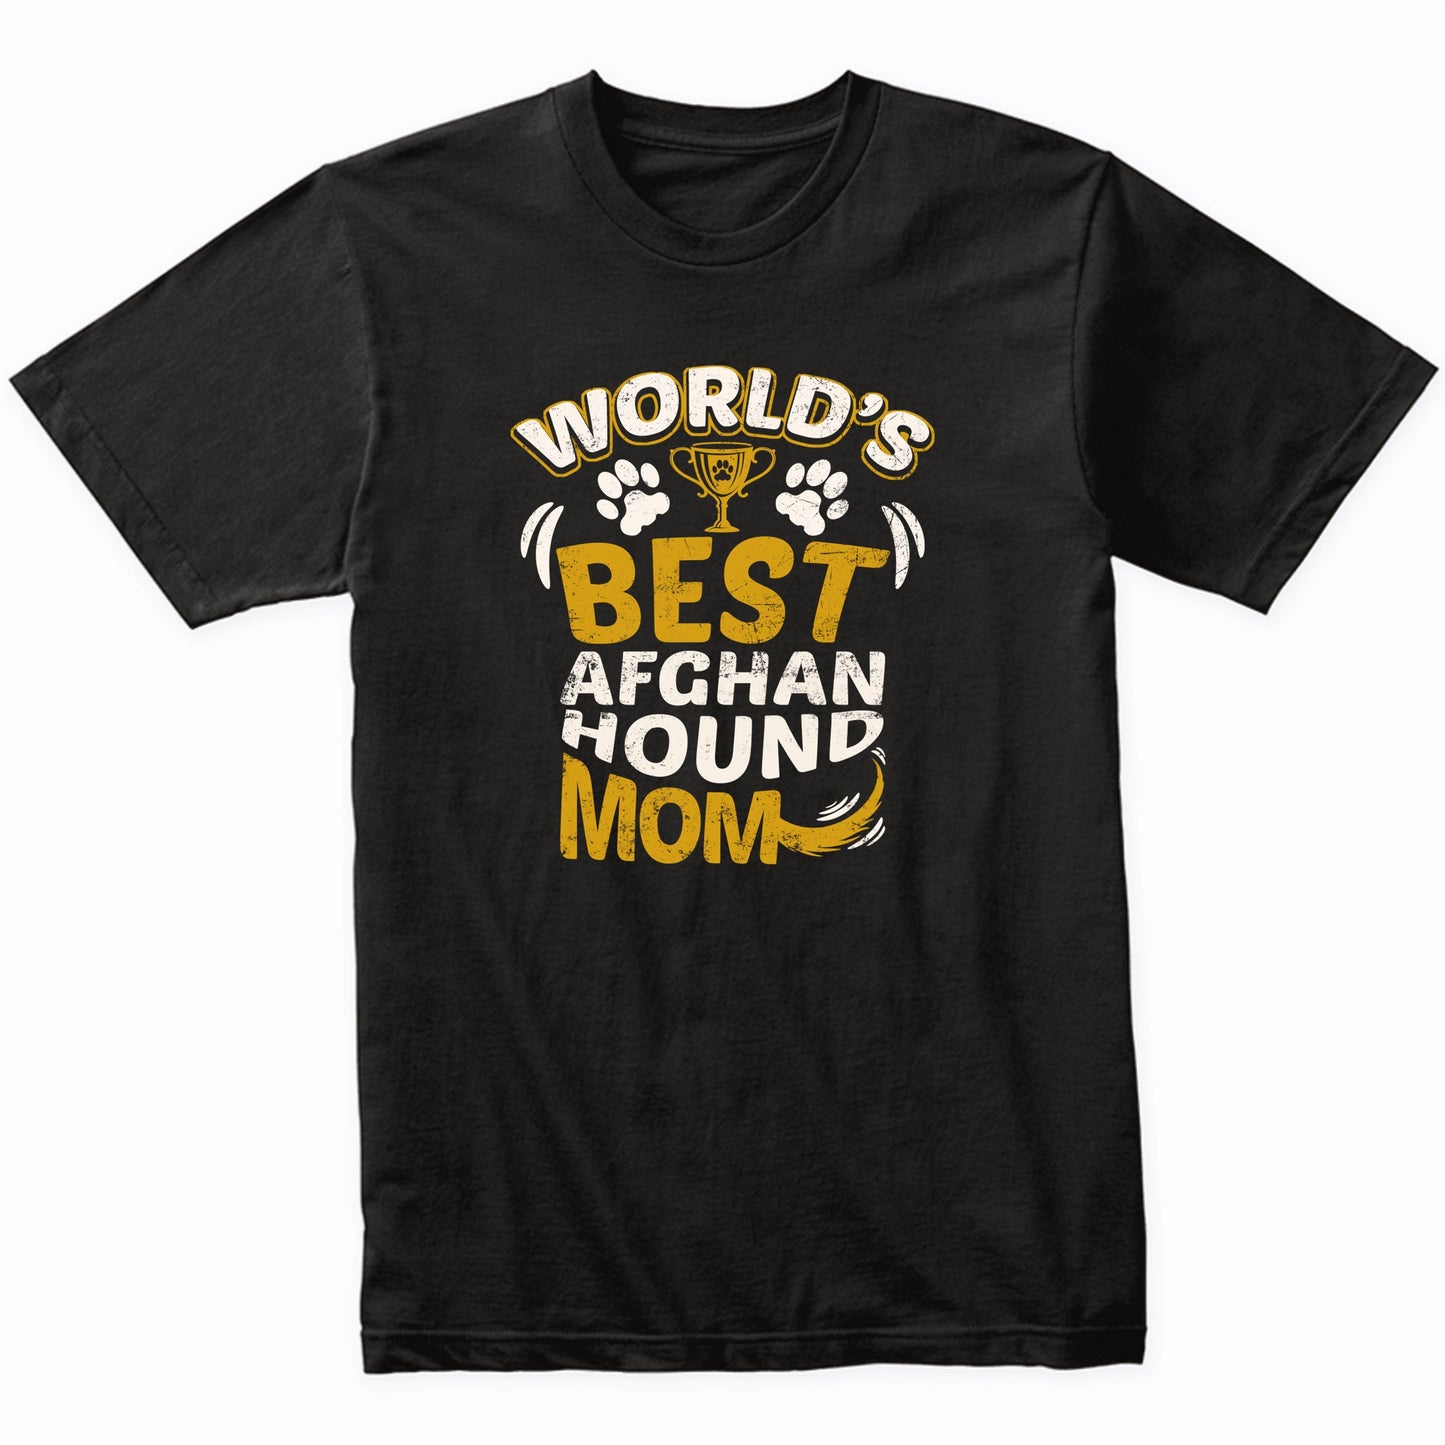 World's Best Afghan Hound Mom Graphic T-Shirt